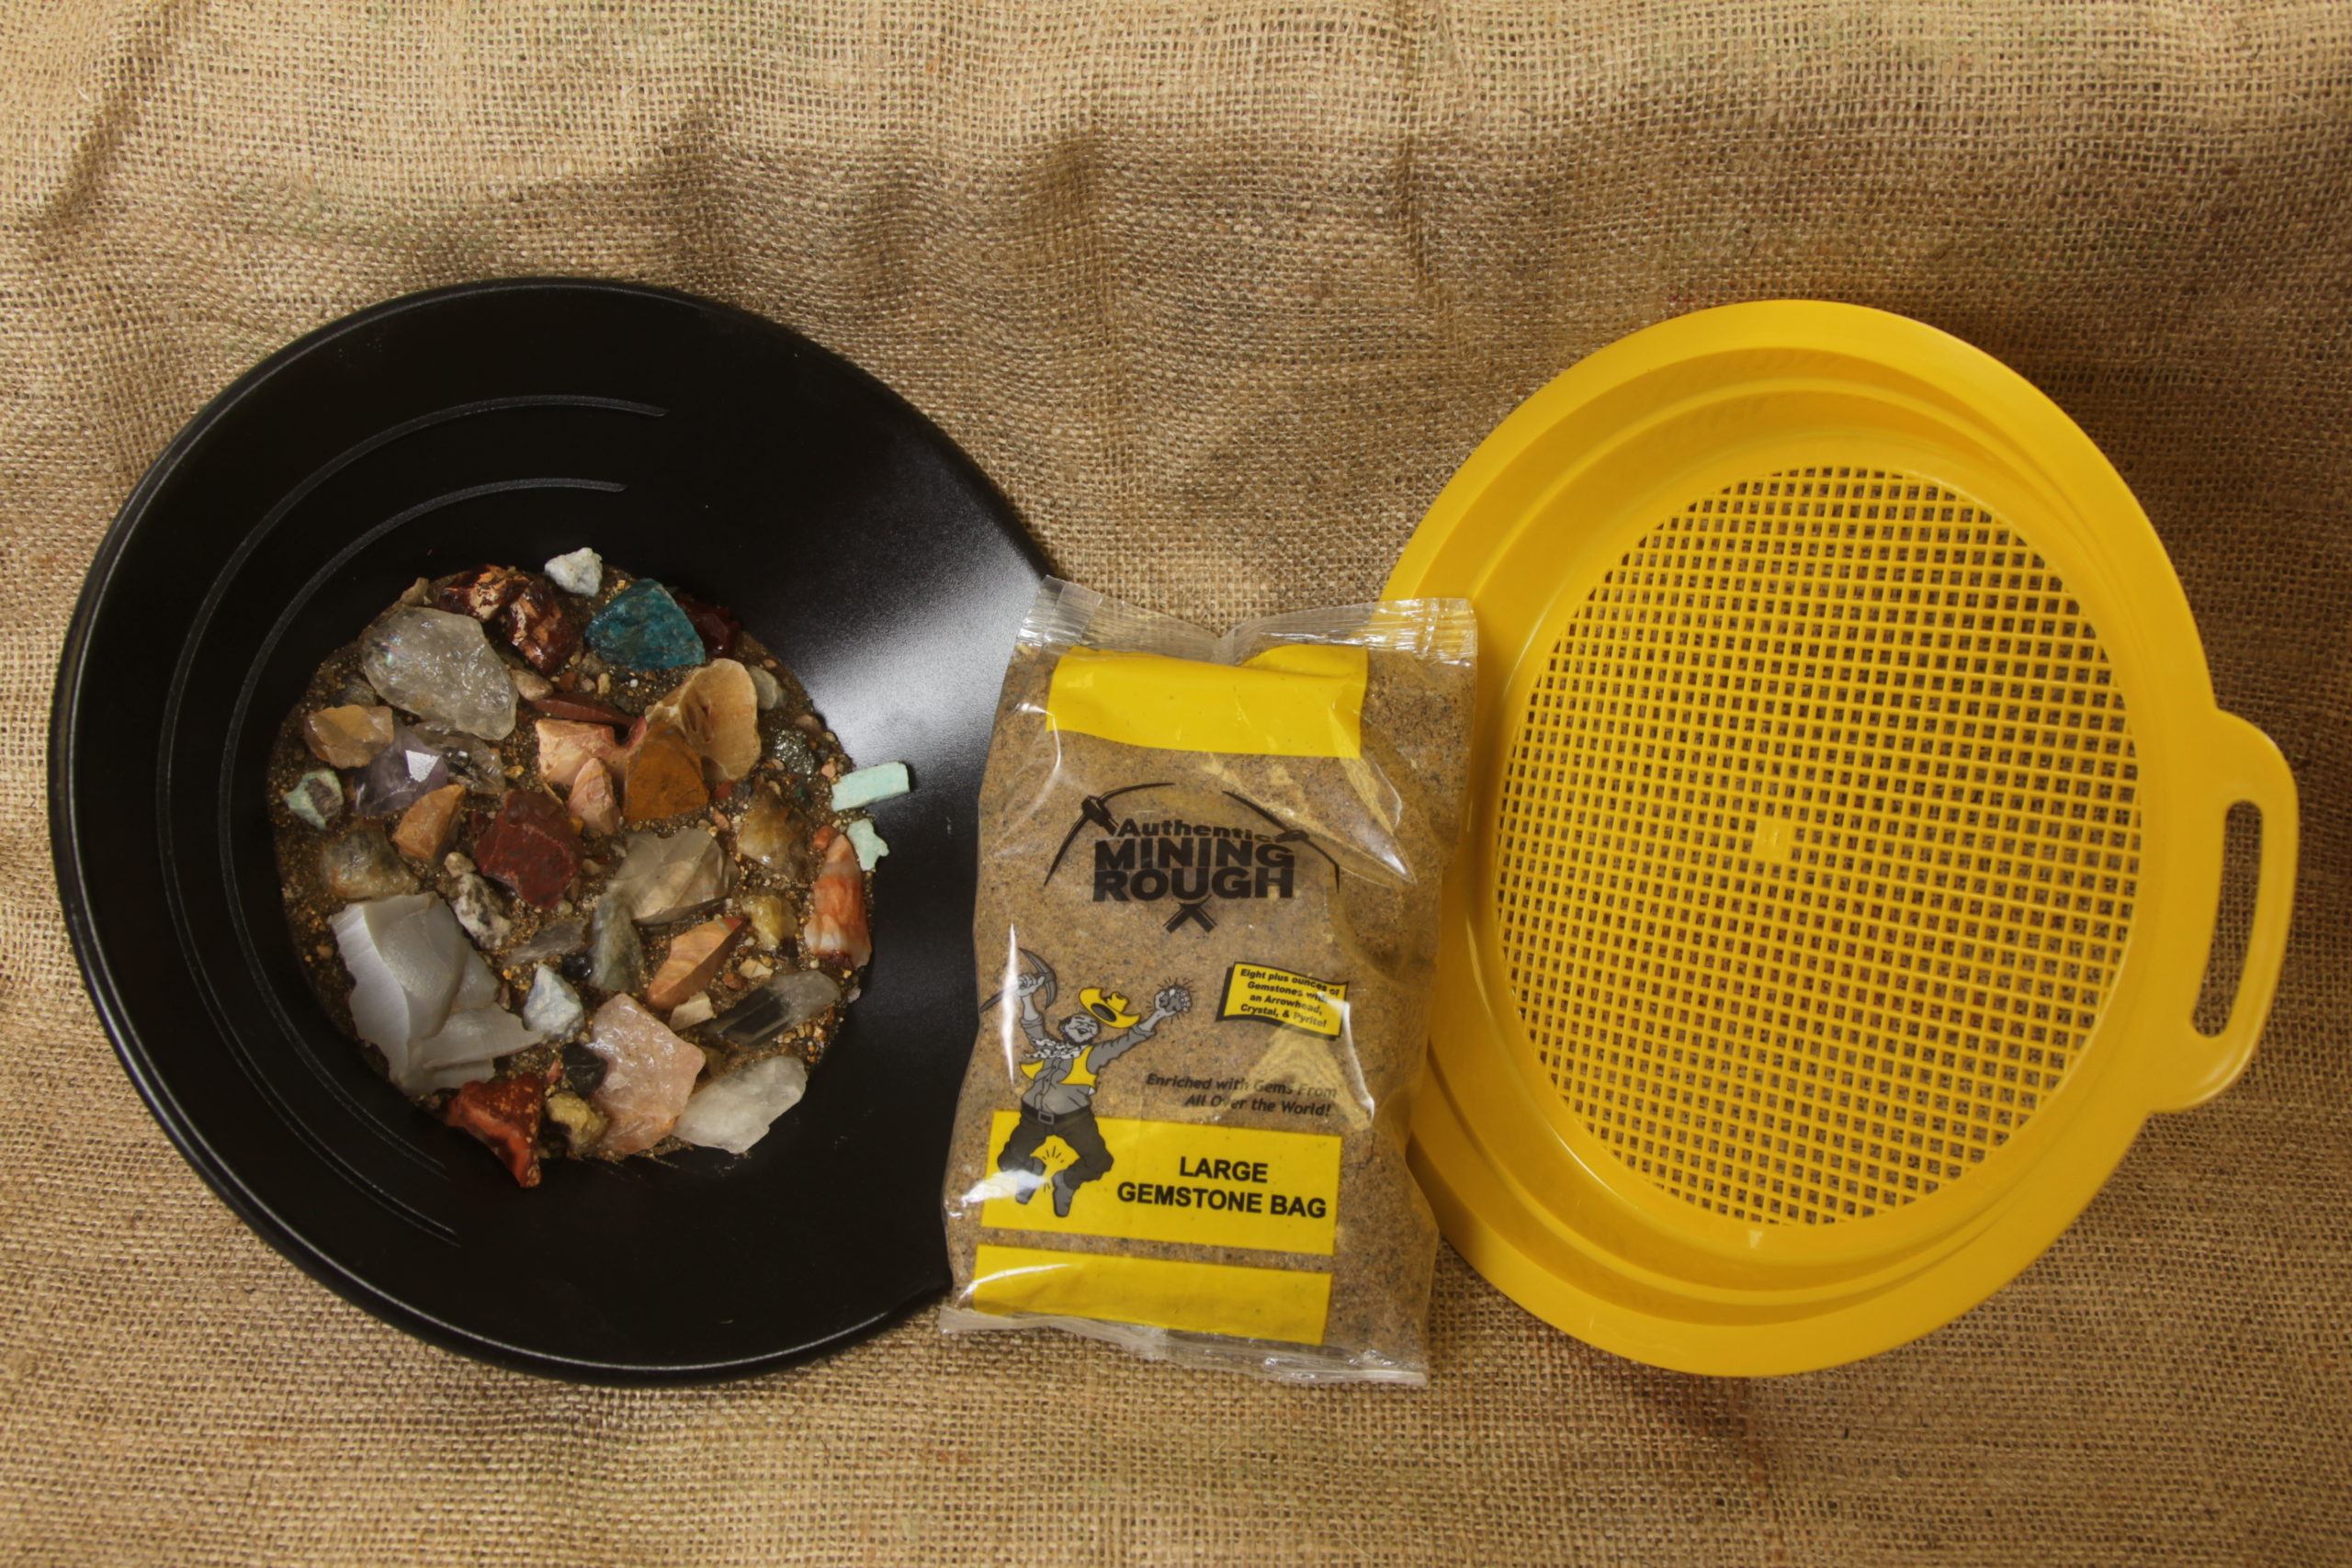 Real crystal Mining kit Yellow bagwith sifter sand and gemstones